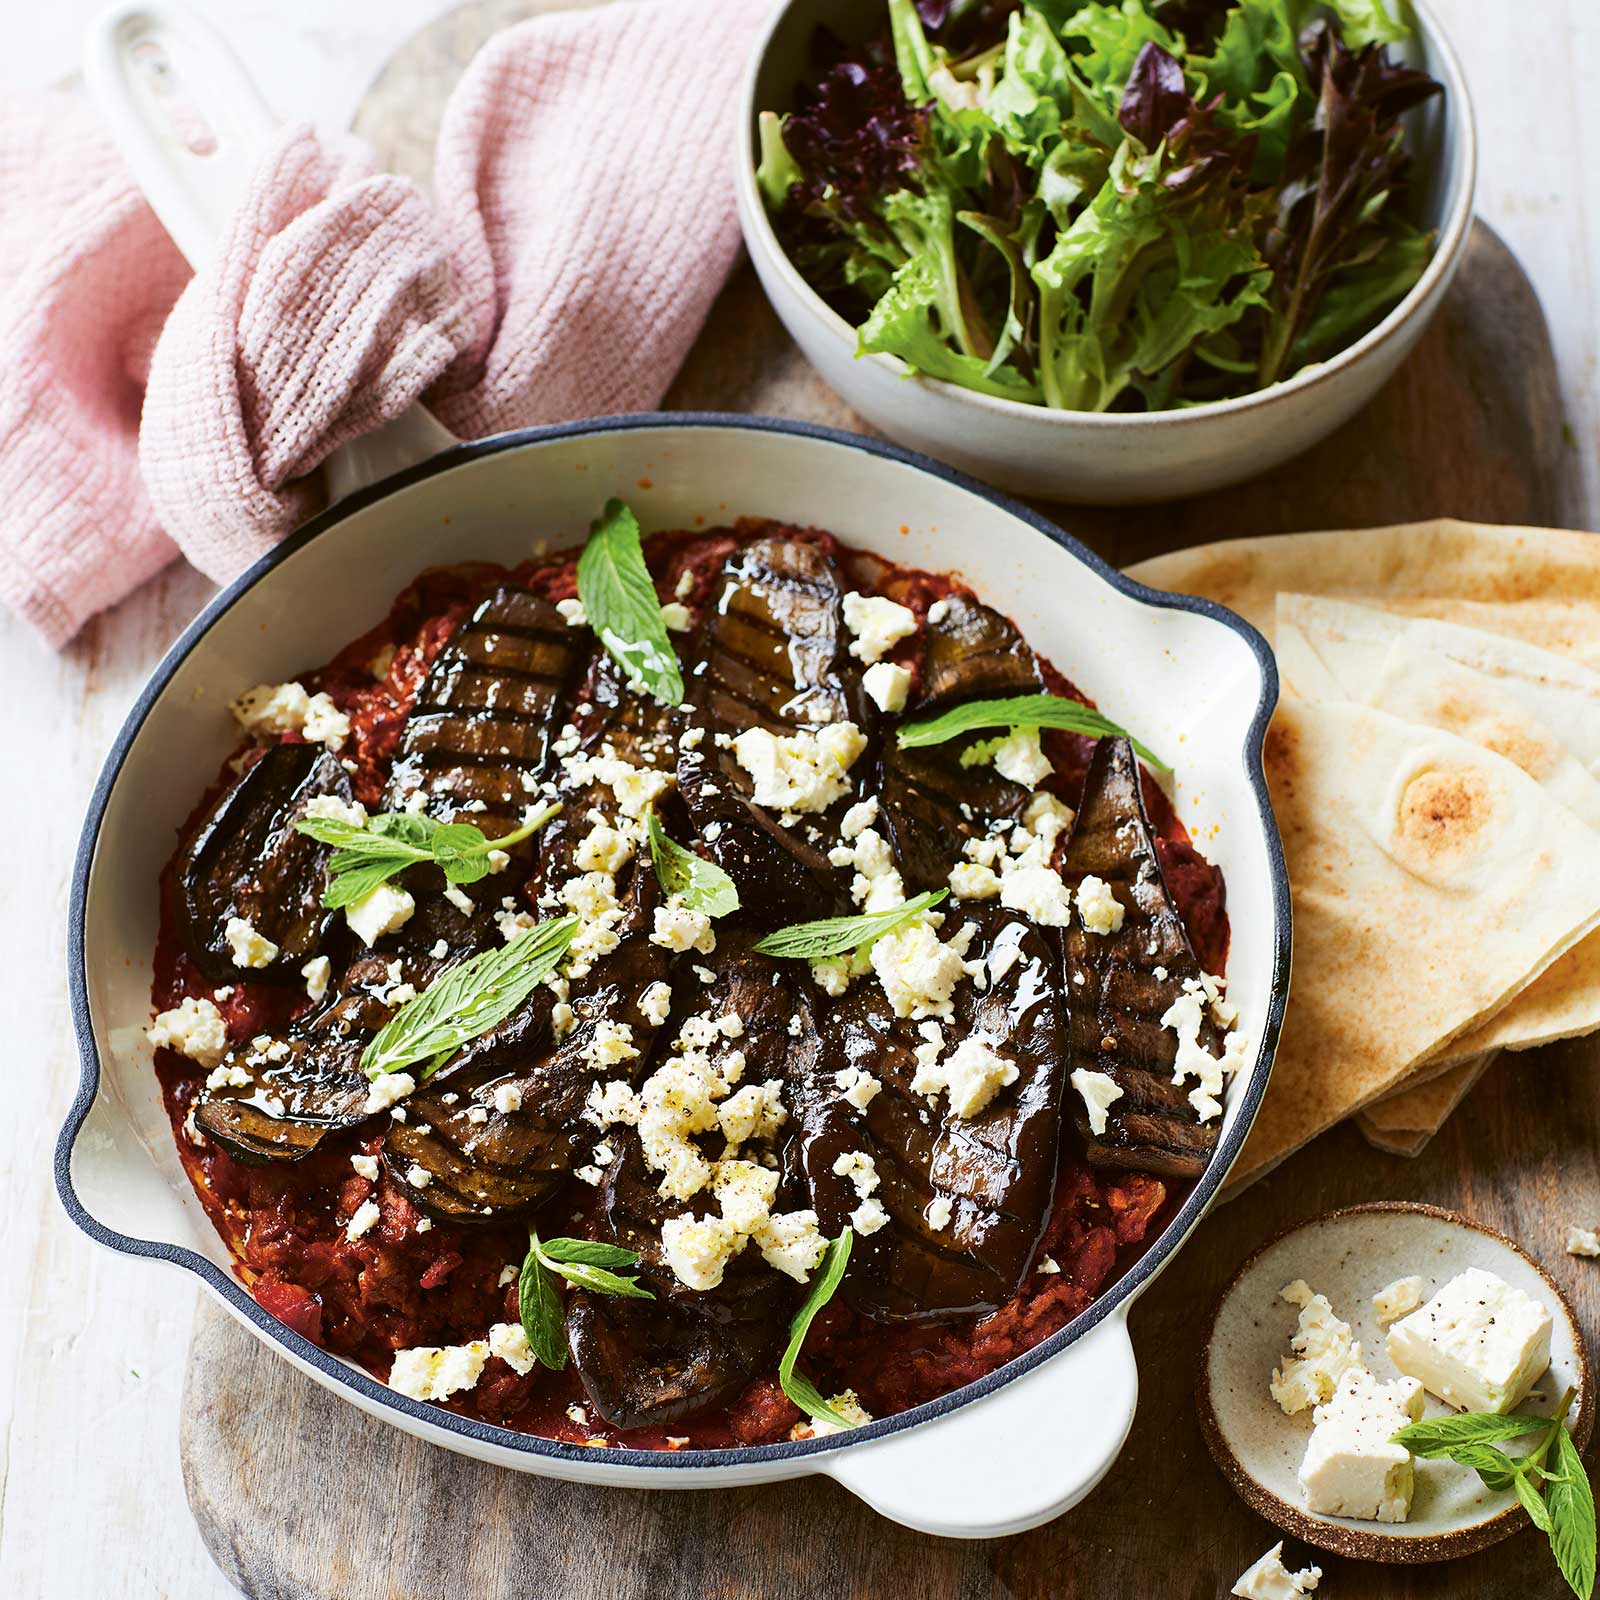 A white cast-iron pan is filled with an easy moussaka. The top has been sprinkled with feta and fresh herbs. At the back is a small salad of leafy greens in a bowl and slices of gluten-free pita sit on the side.